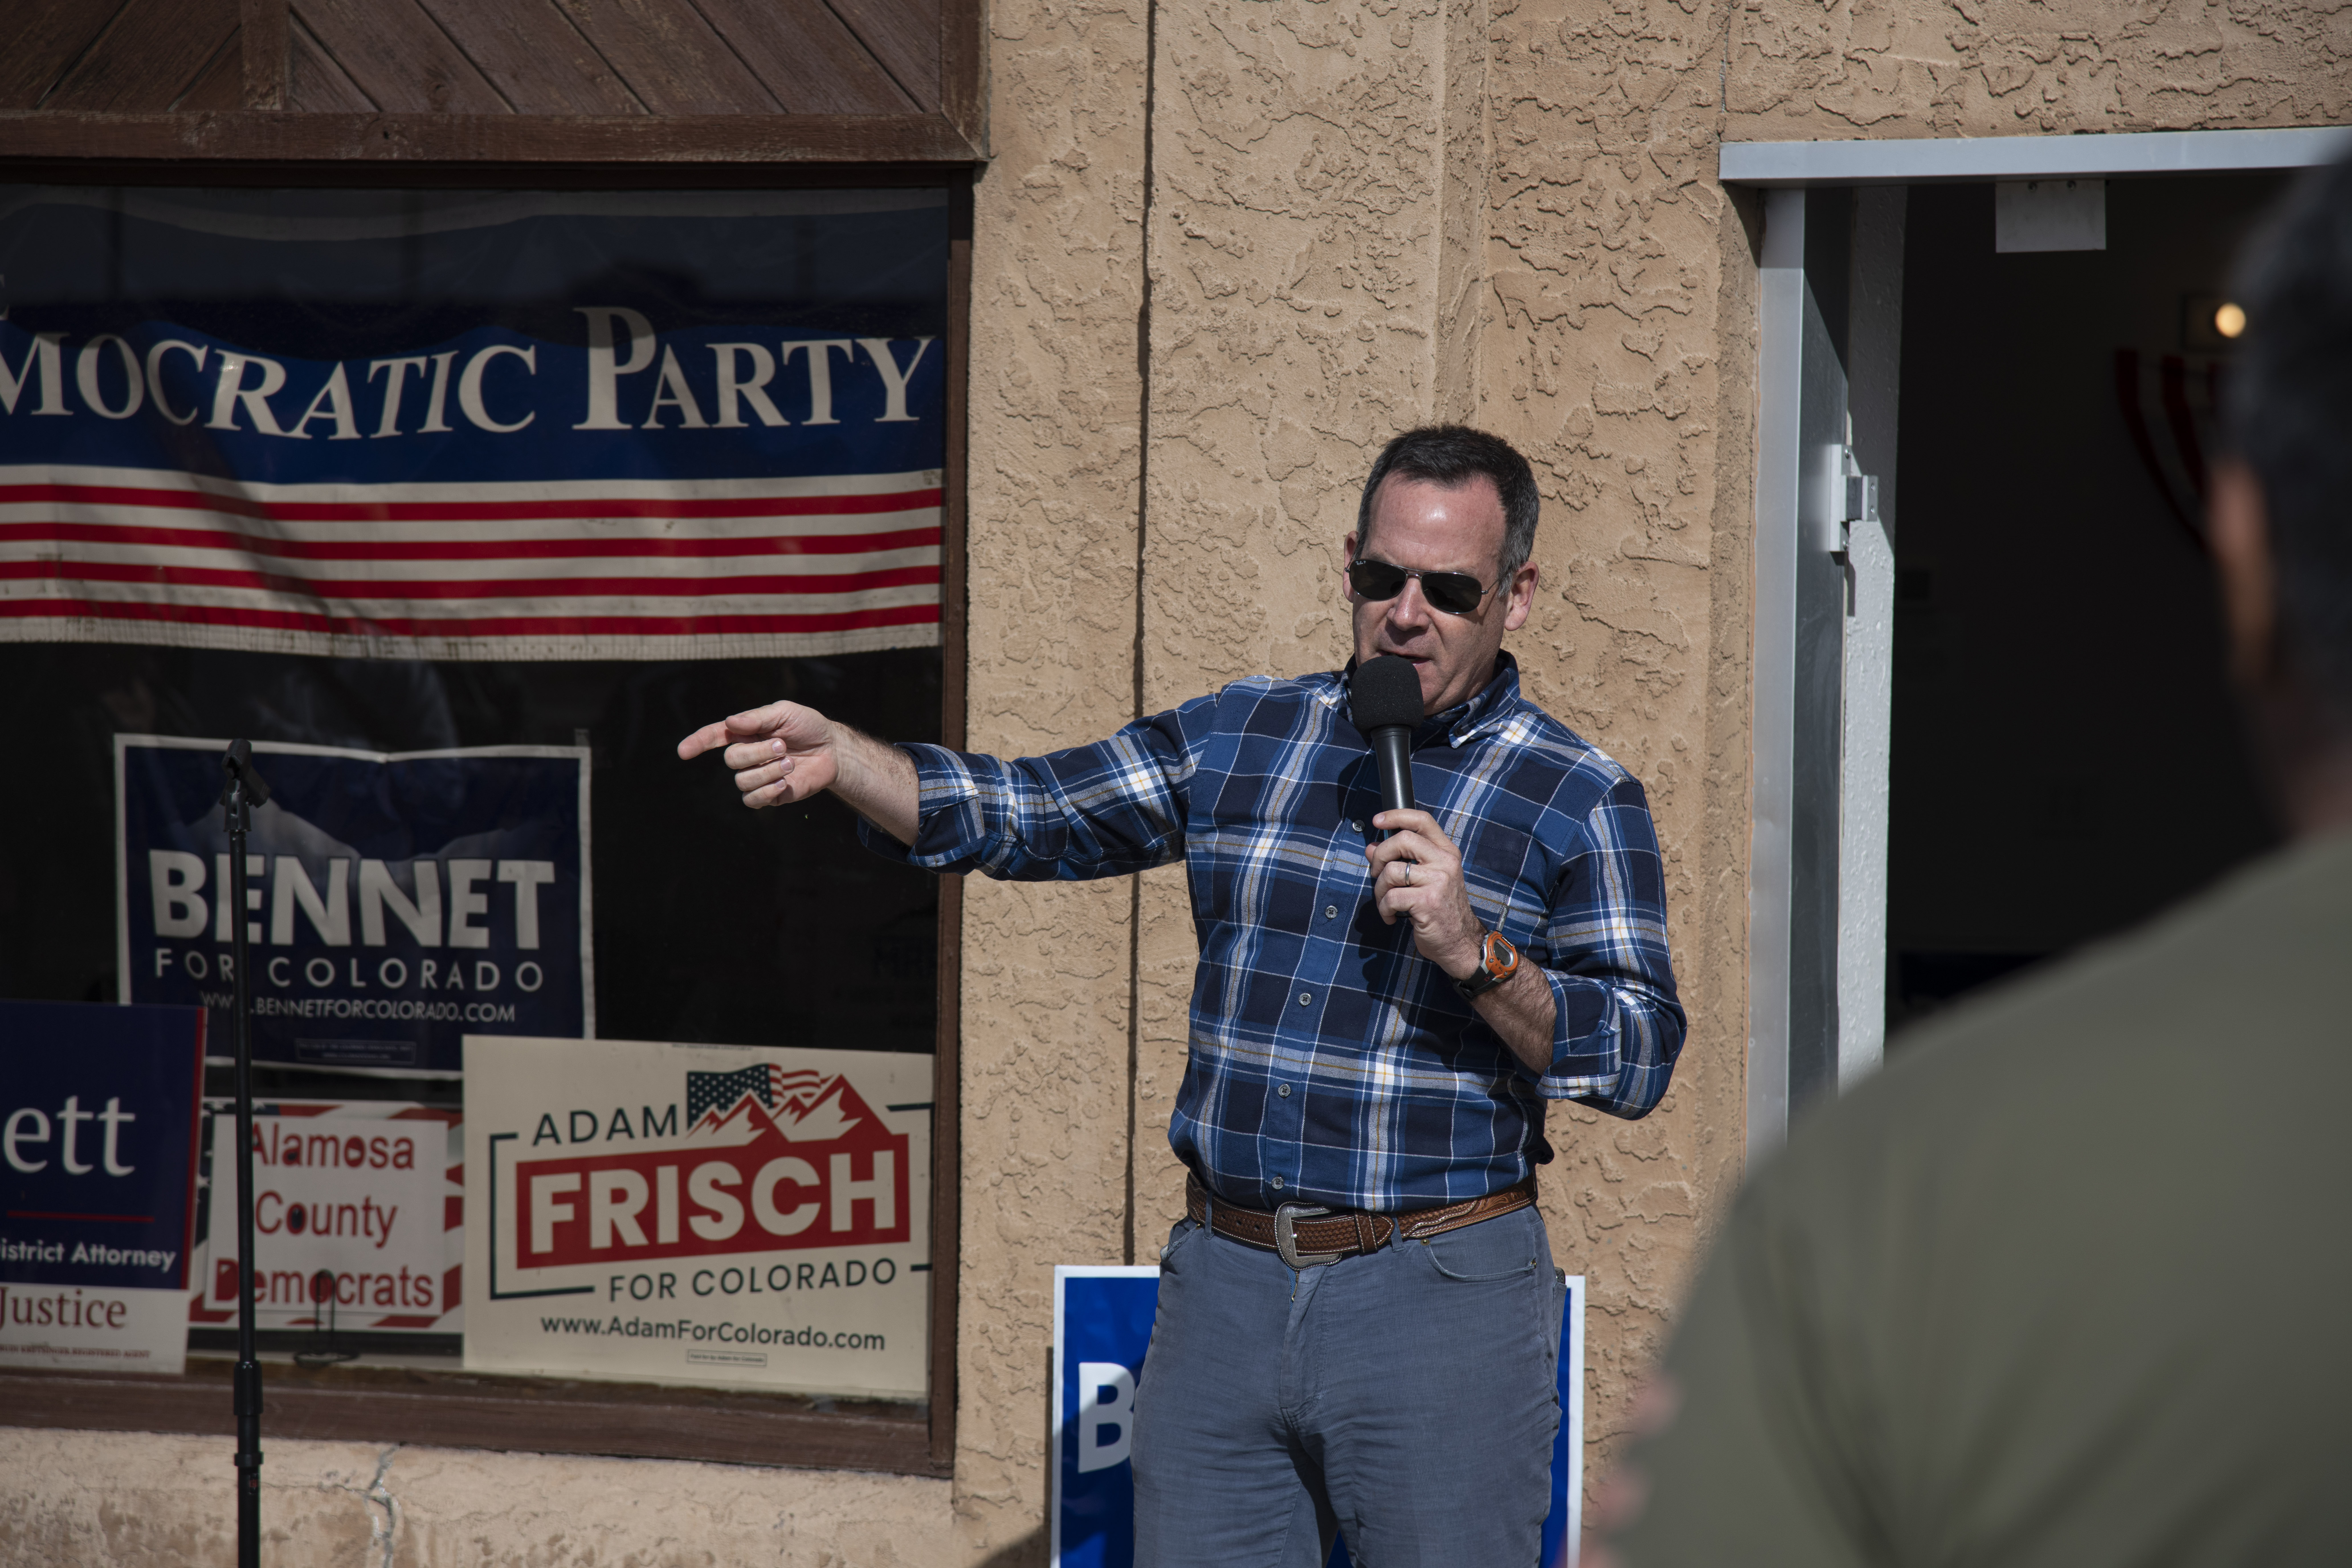 Colorado Third Congressional District candidate Adam Frisch speaks to supporters during a rally supporting Colorado Democrats Sunday, October 30, 2022, at the Alamosa Democratic Headquarters in downtown Alamosa, Colo. (Photo by William Woody/Special to The Denver Post)